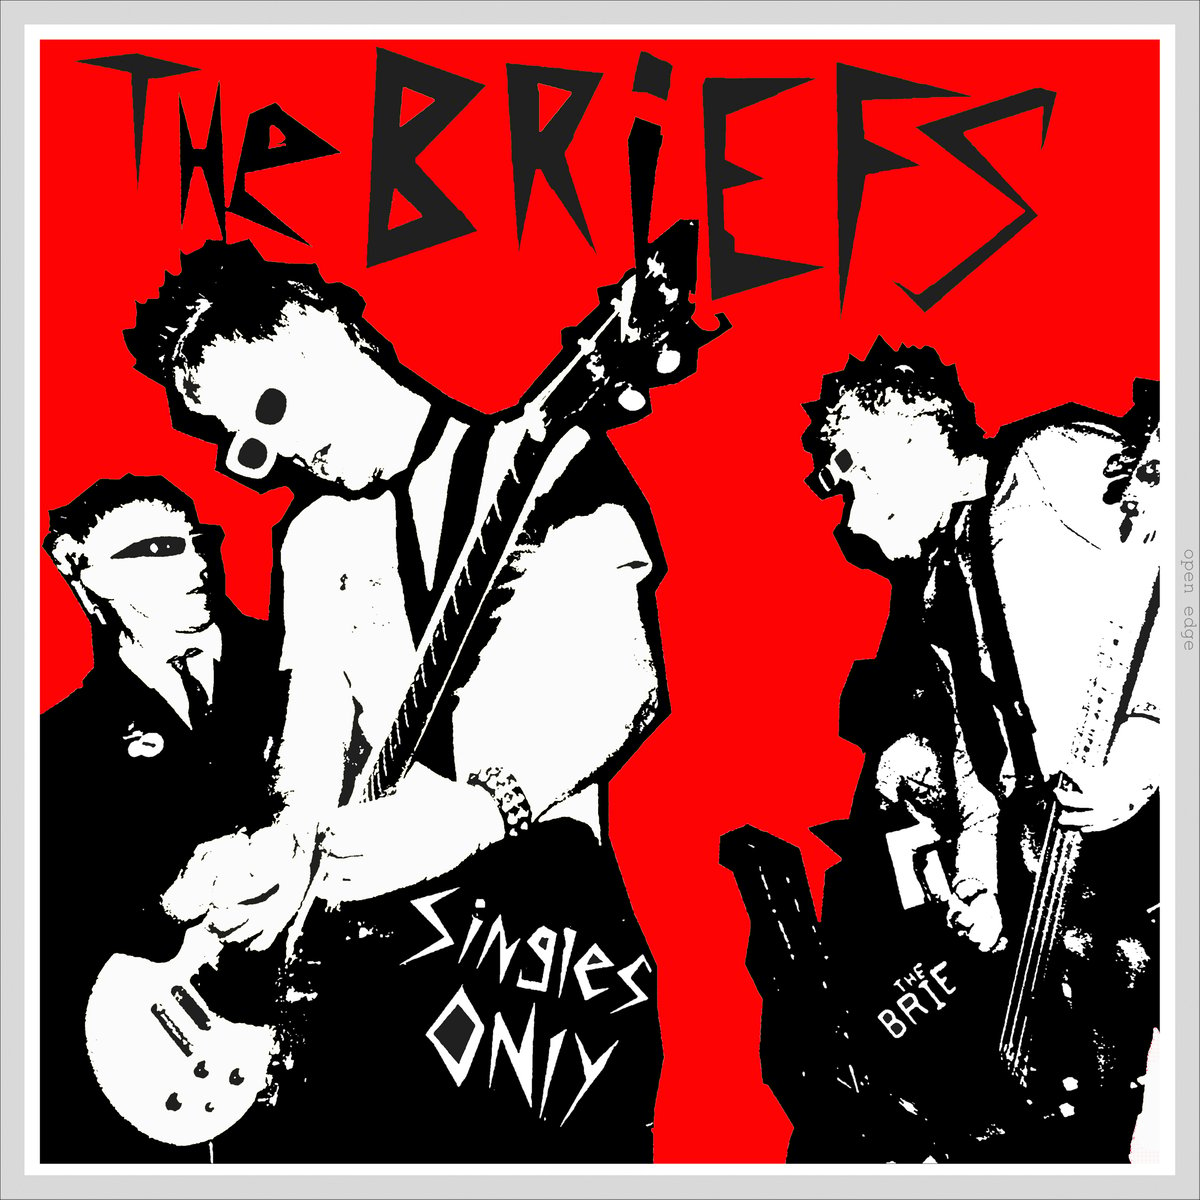 Image of  The Briefs Singles Only LP Limited Edition Screen Printed Jacket Black Vinyl